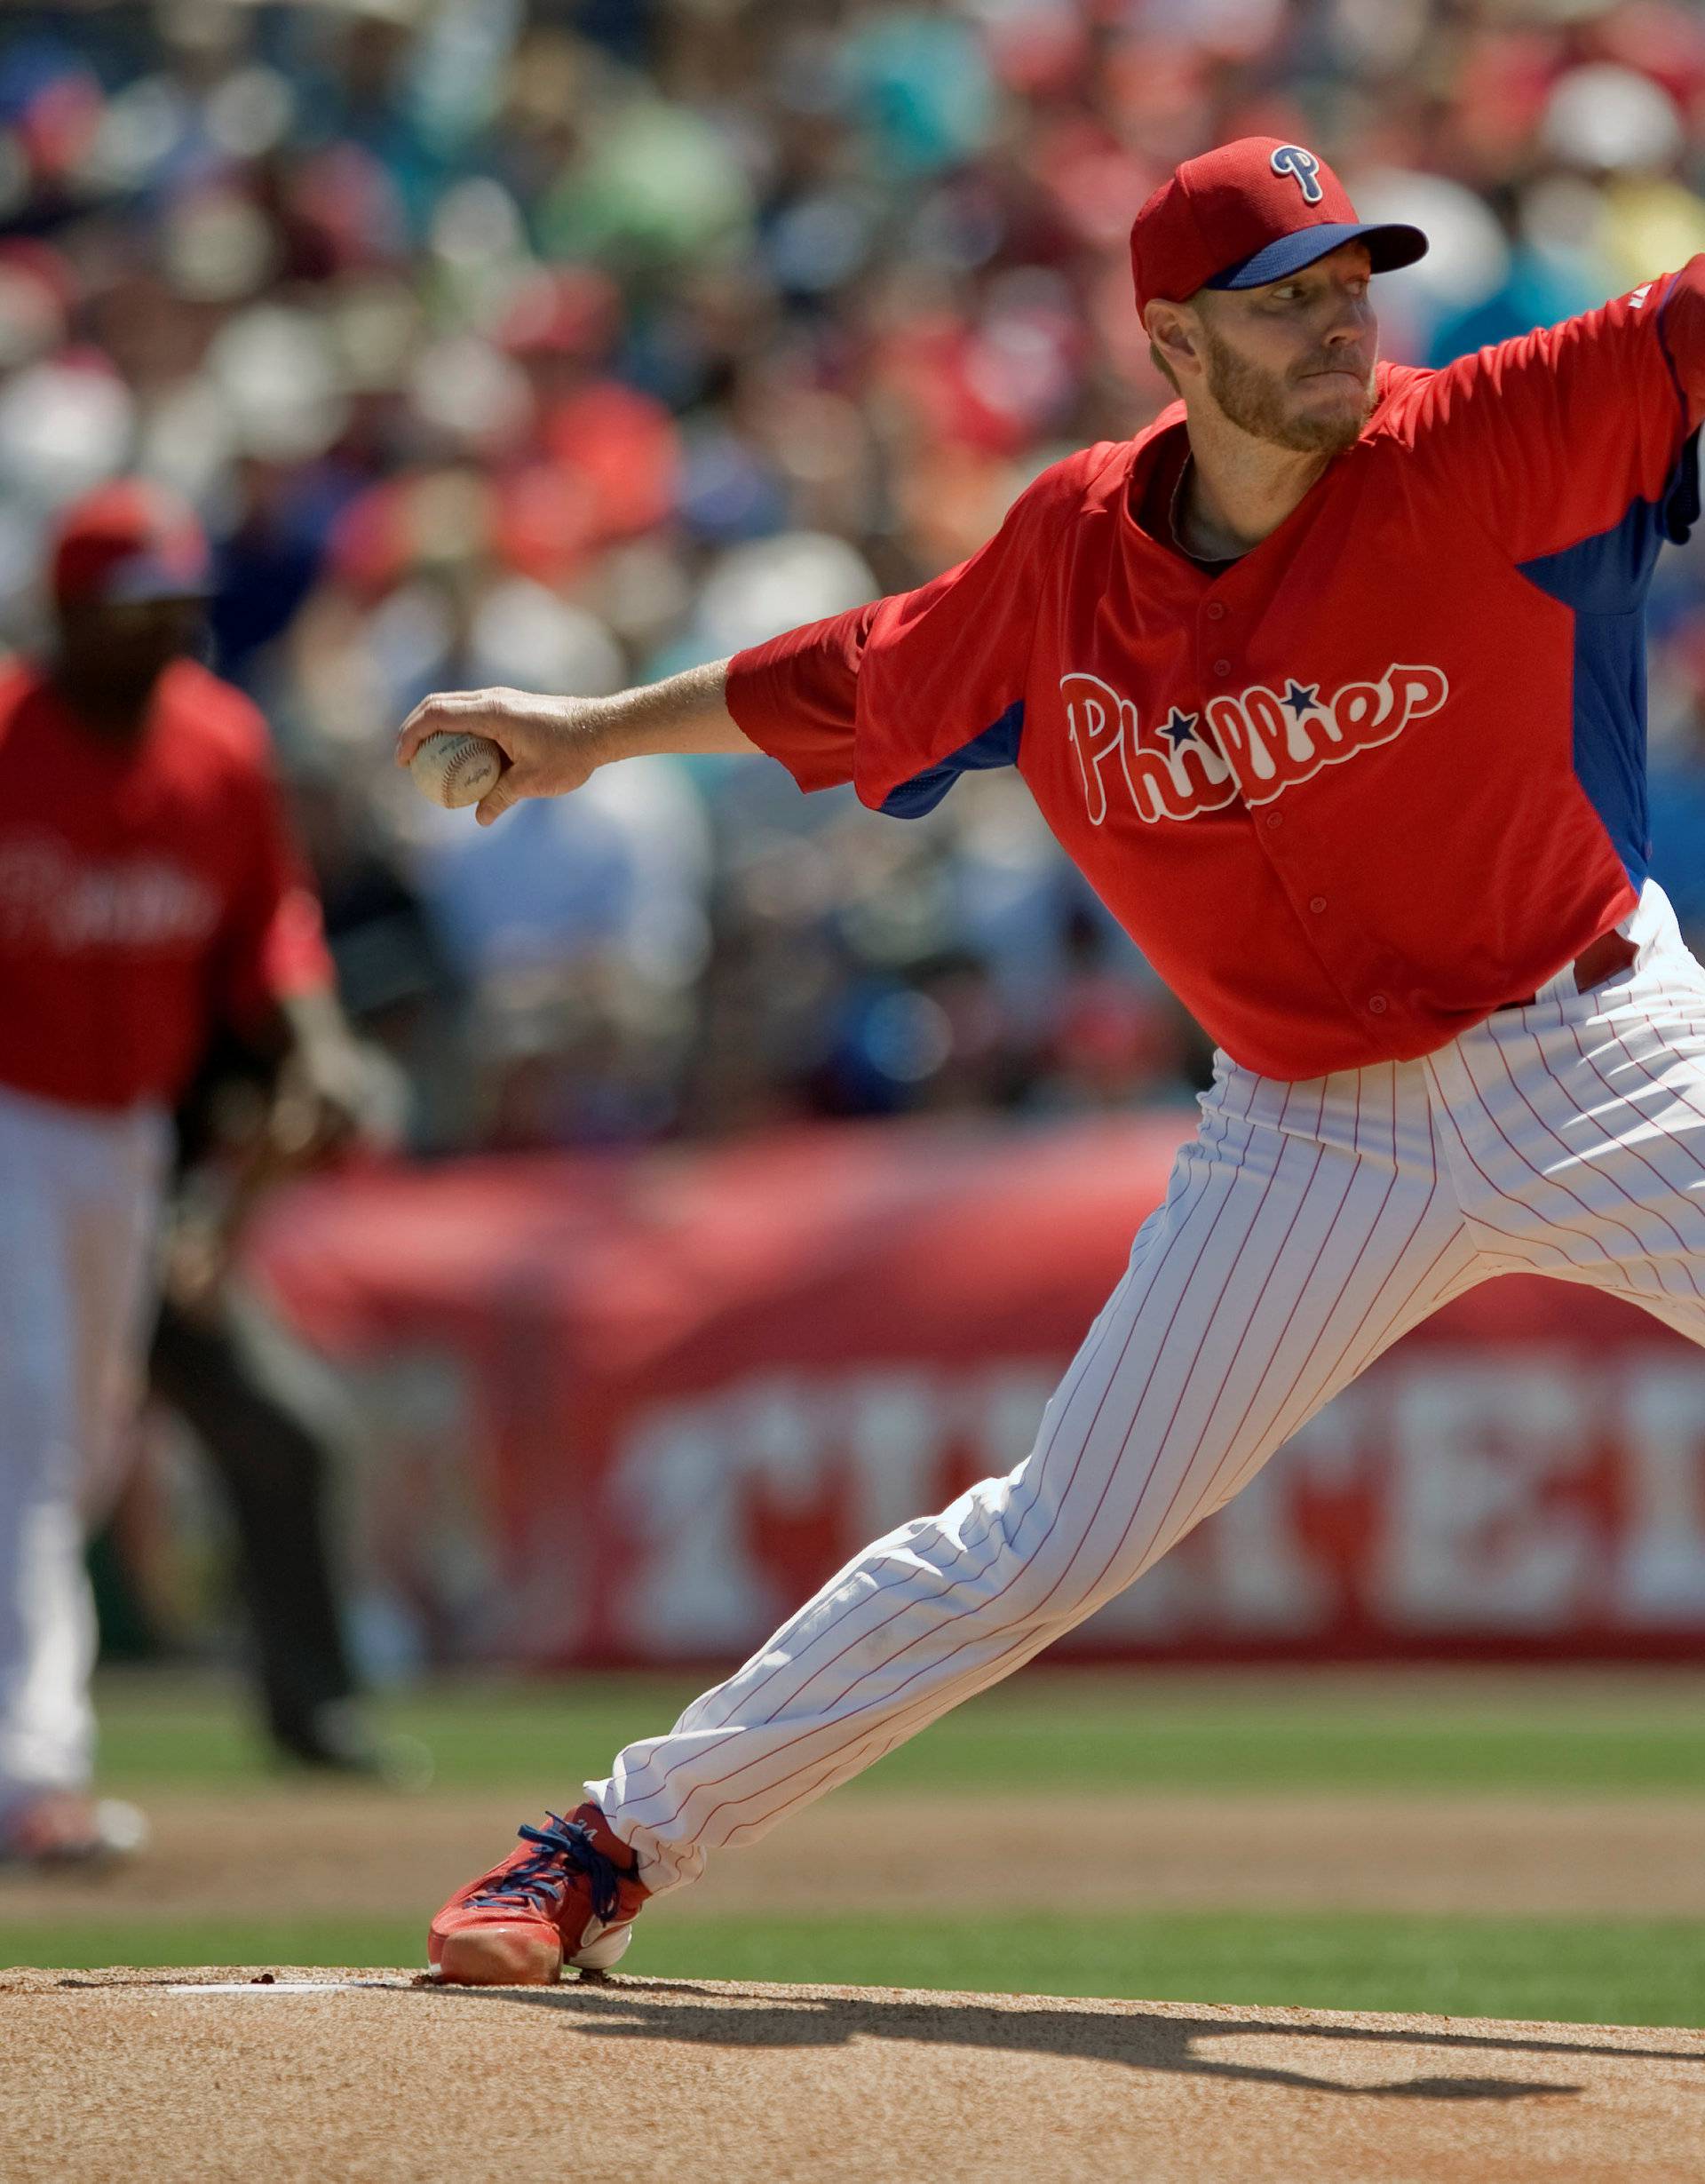 FILE PHOTO:  Philadelphia Phillies starter Halladay pitches against the Toronto Blue Jays during a MLB spring training baseball game in Clearwater, Florida